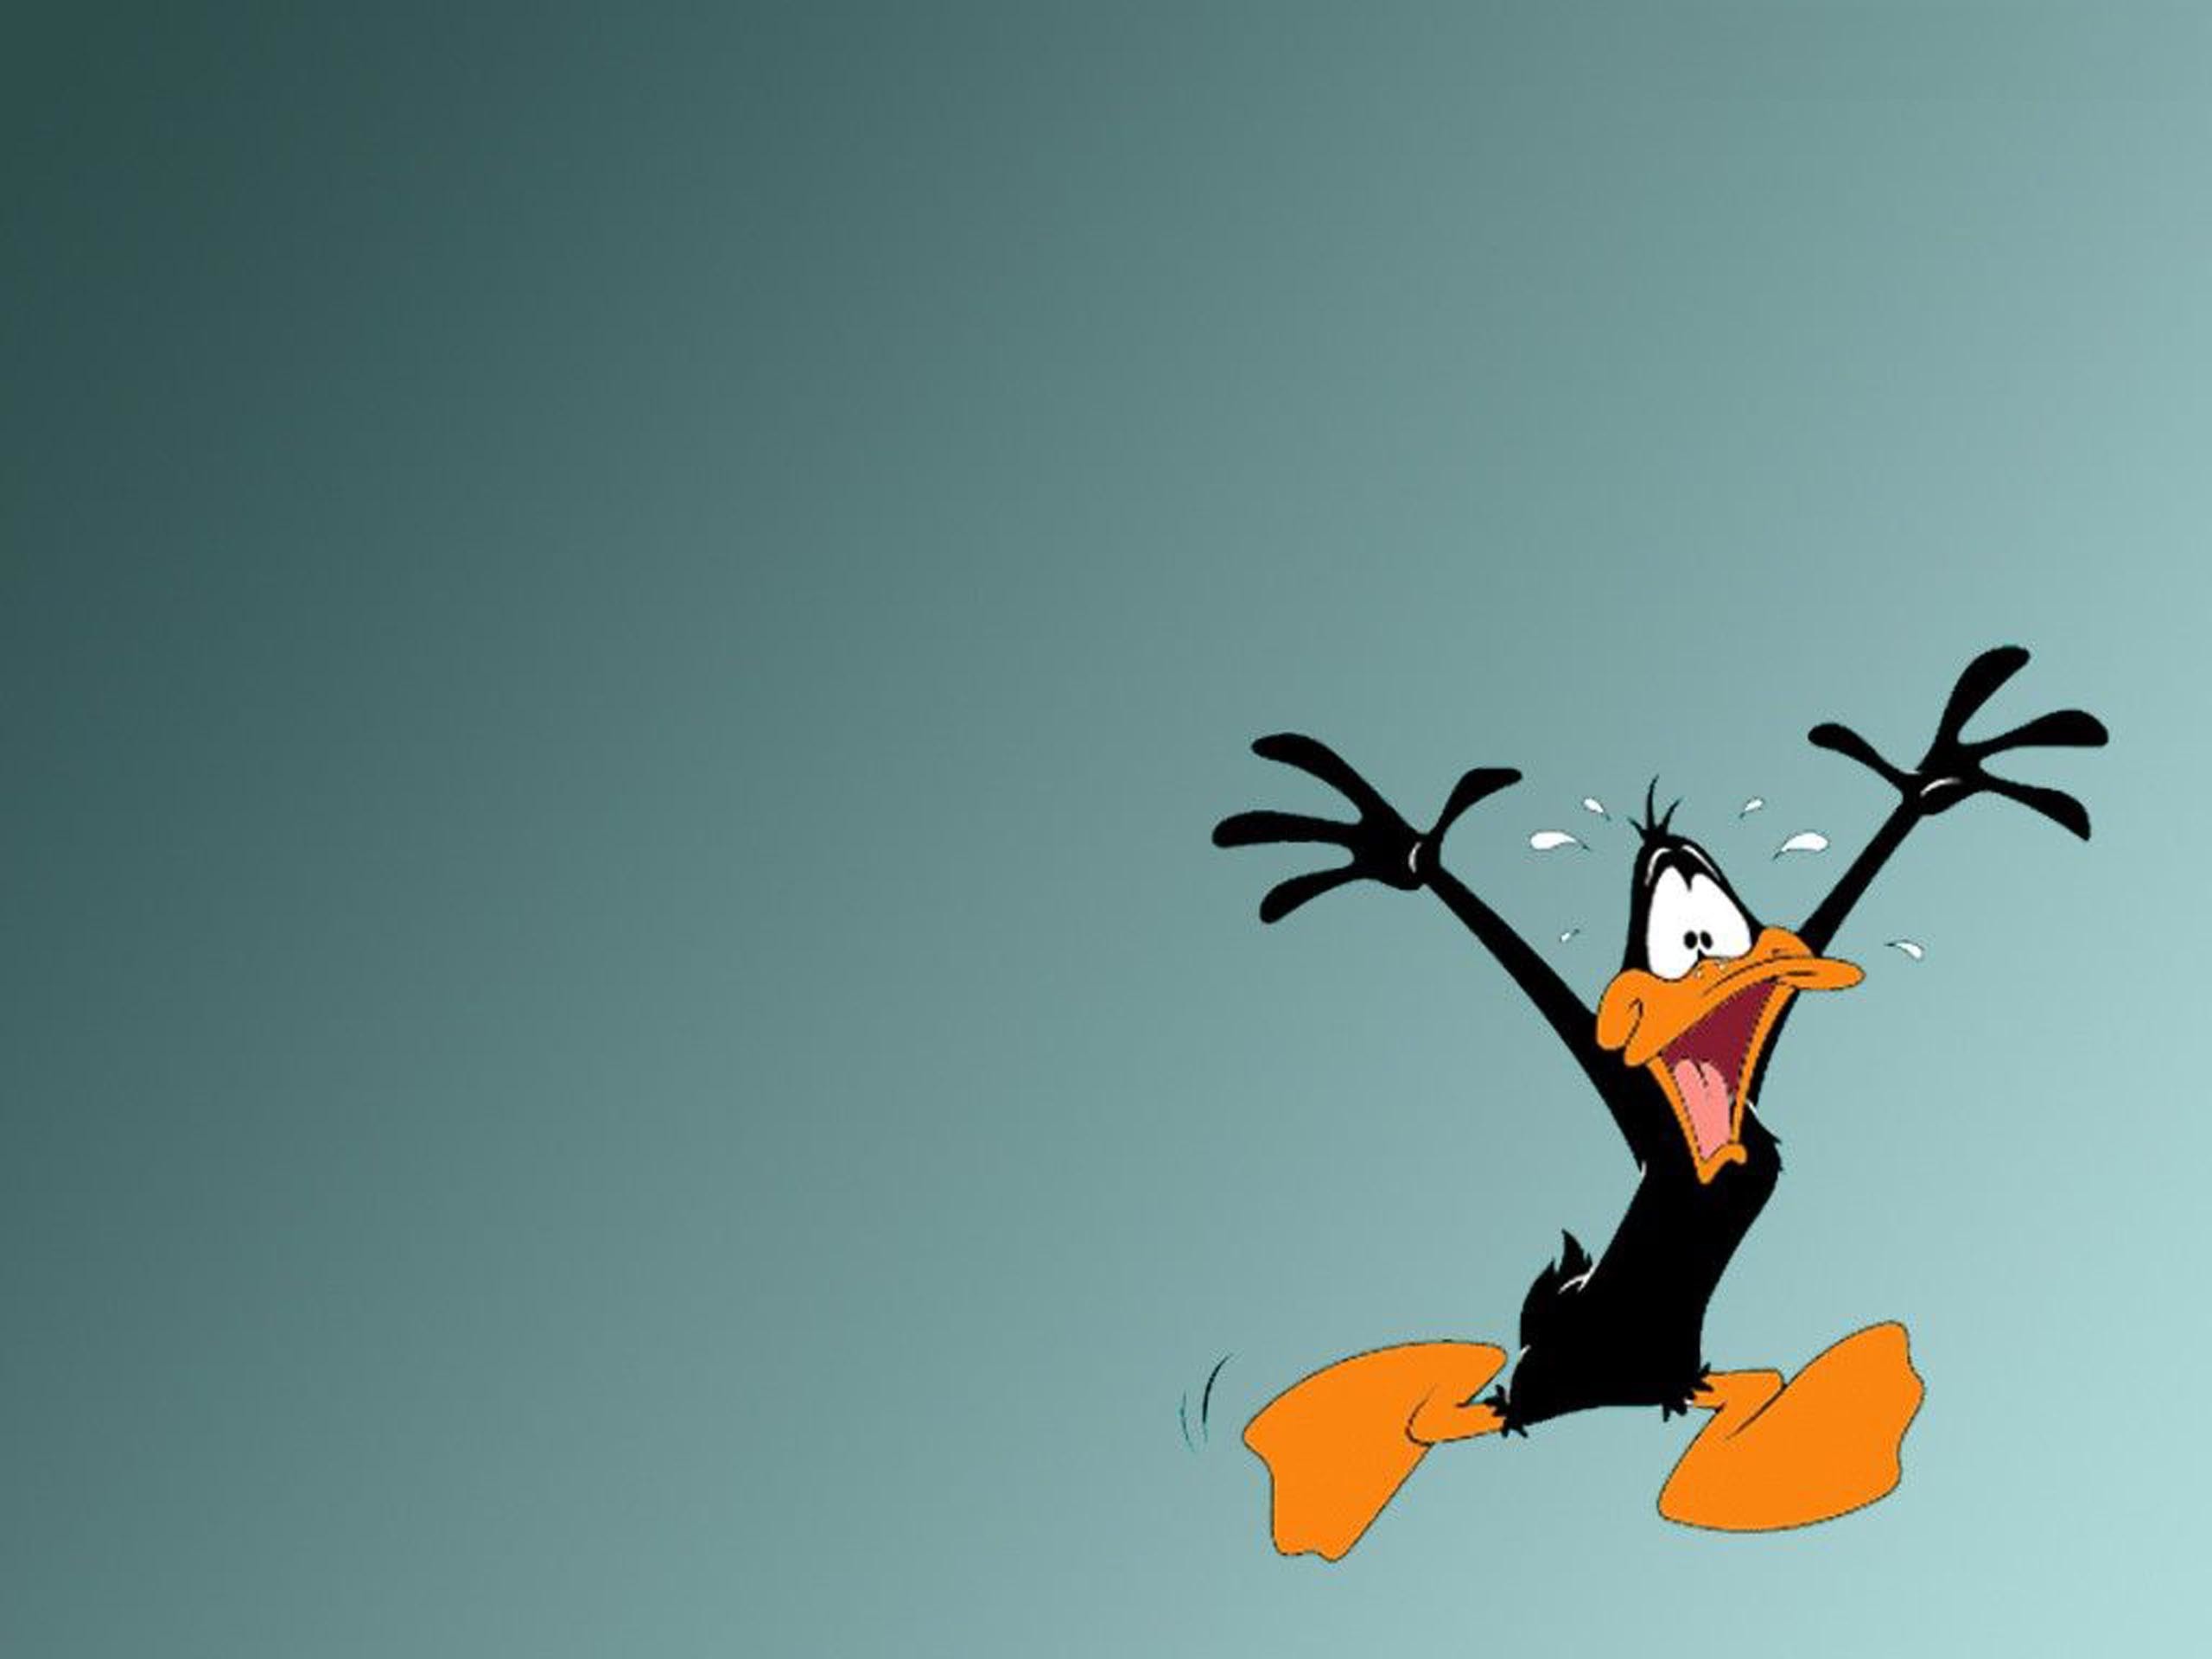 2560x1920 ... Looney Tunes Hd Wallpaper 14 Looney Tunes High Quality Wallpapers ...